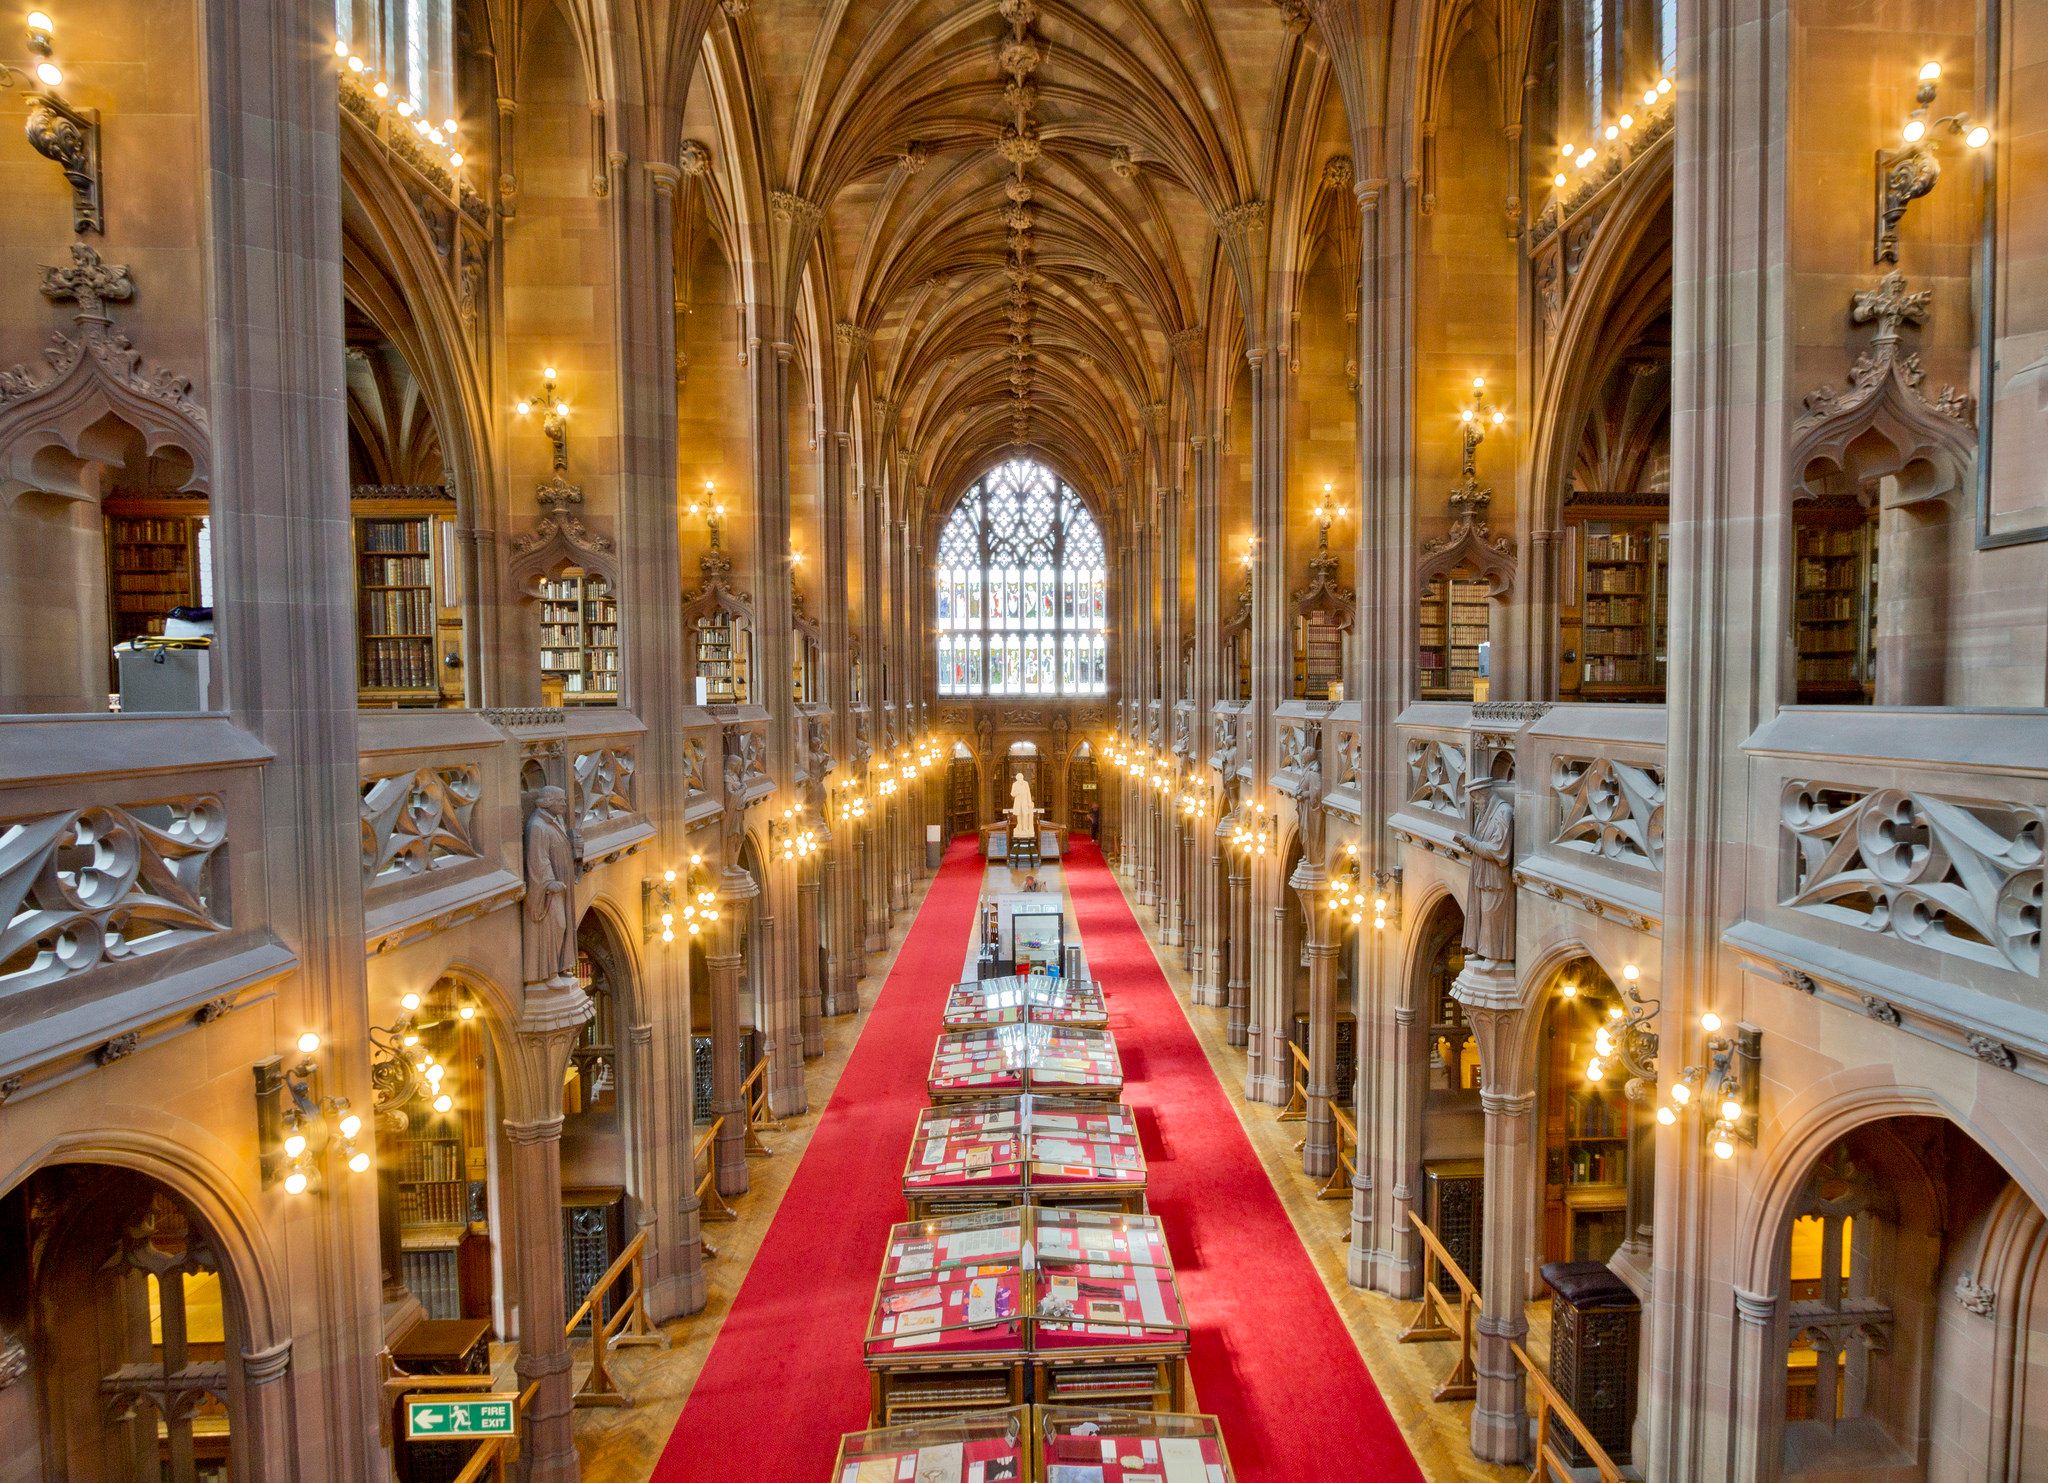 John Rylands Research Institute and Library – Manchester, England - Atlas  Obscura